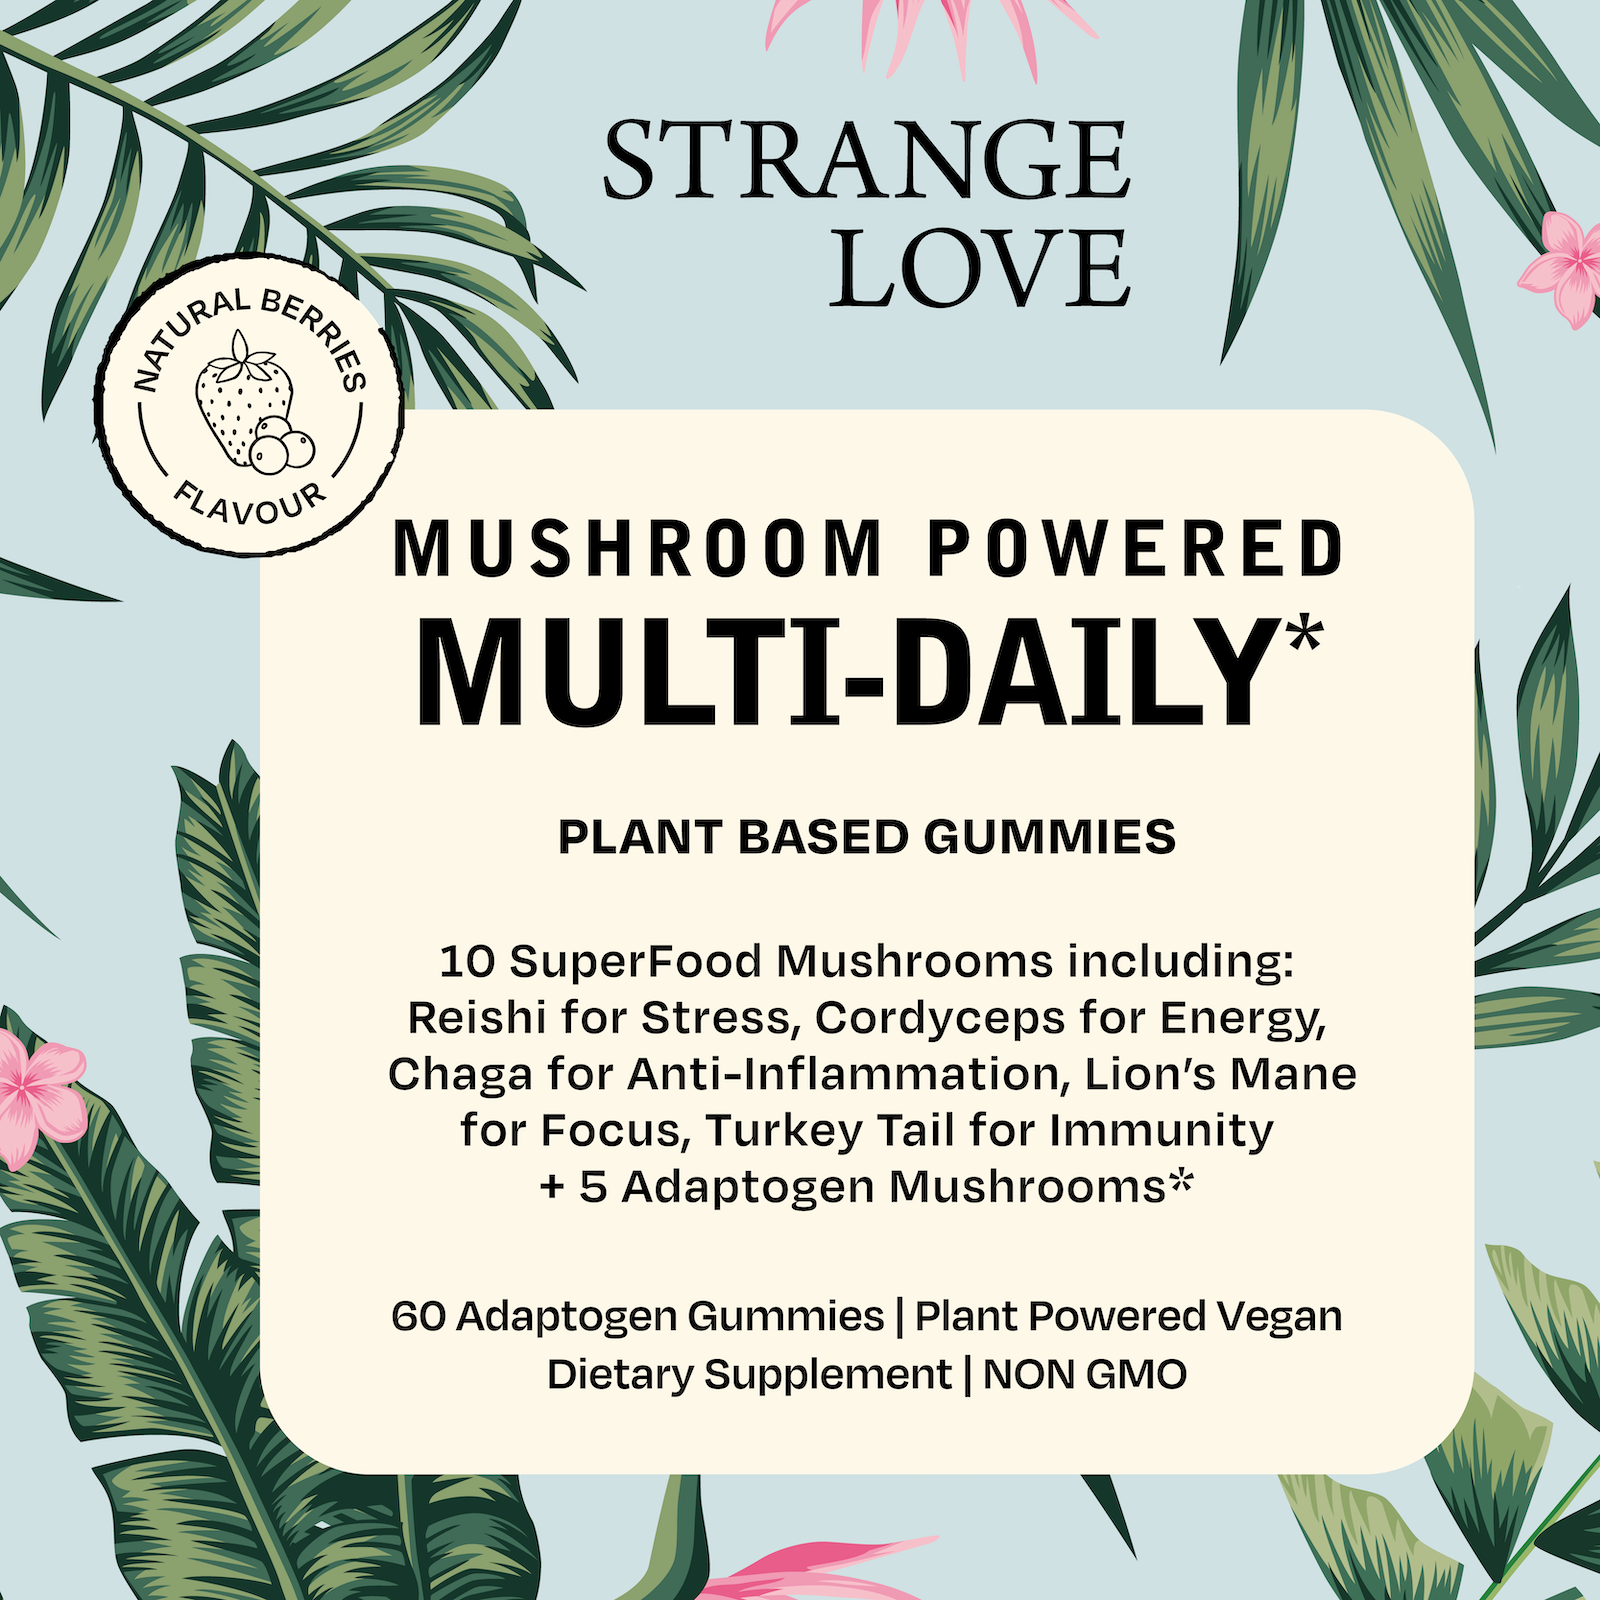 Mushroom Powered Multi-Daily Gummies to Cover Your Bases